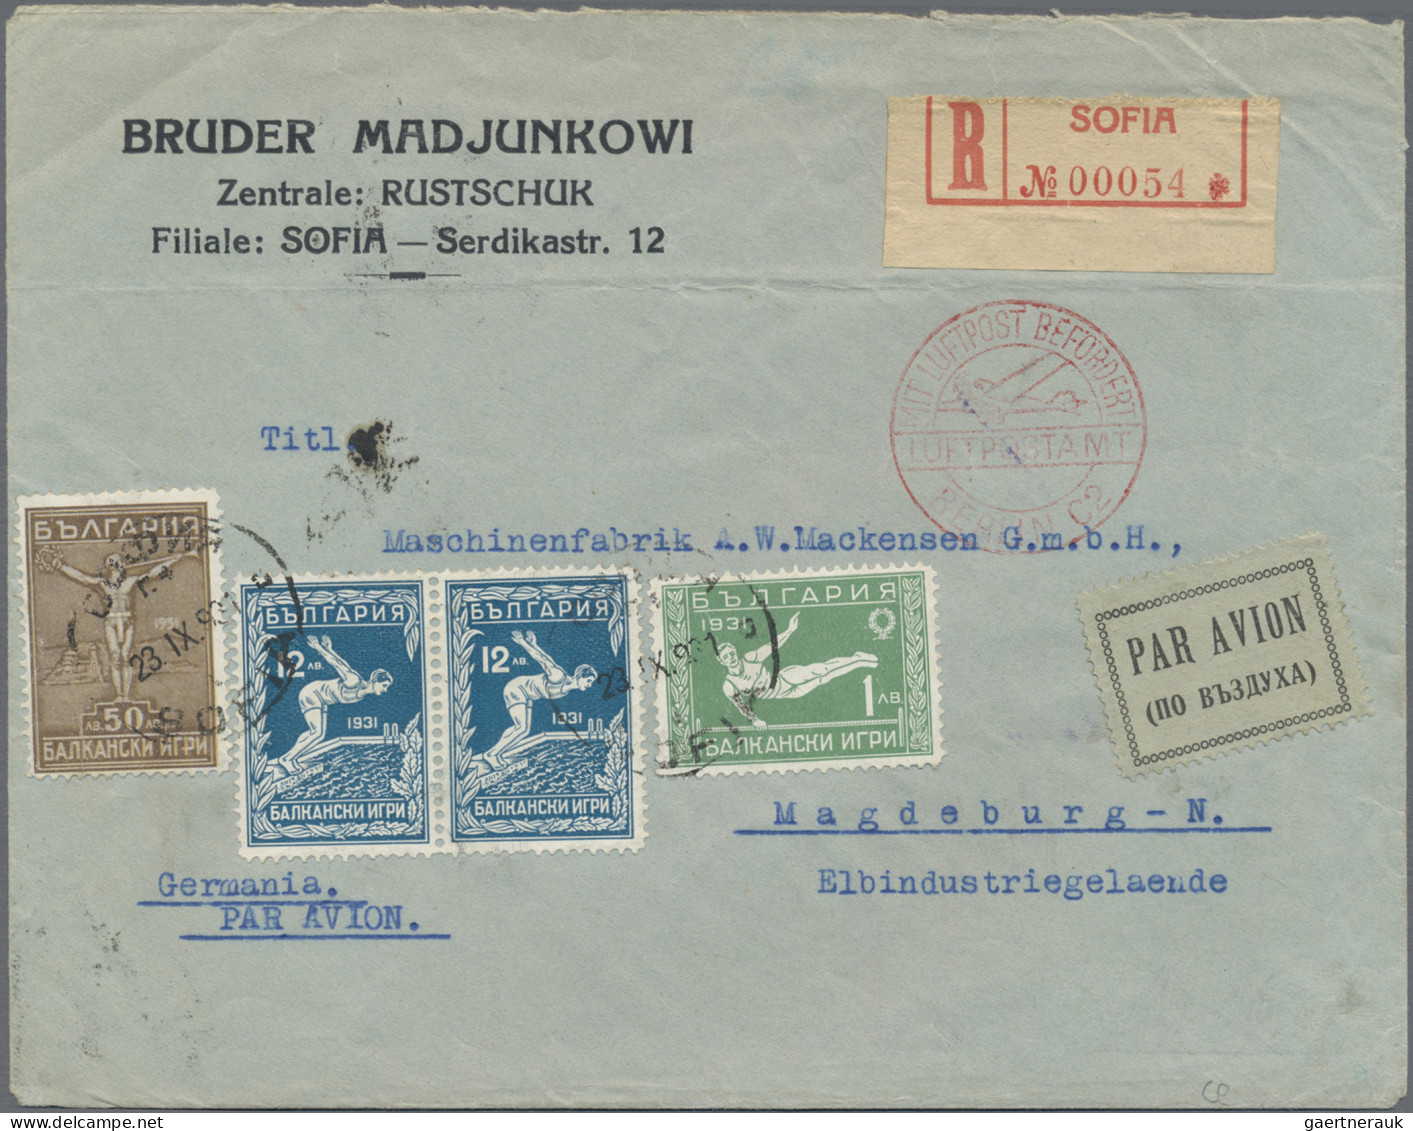 Bulgaria: 1931/1932, Balkan Games, lot of eleven covers/cards, incl. three piece